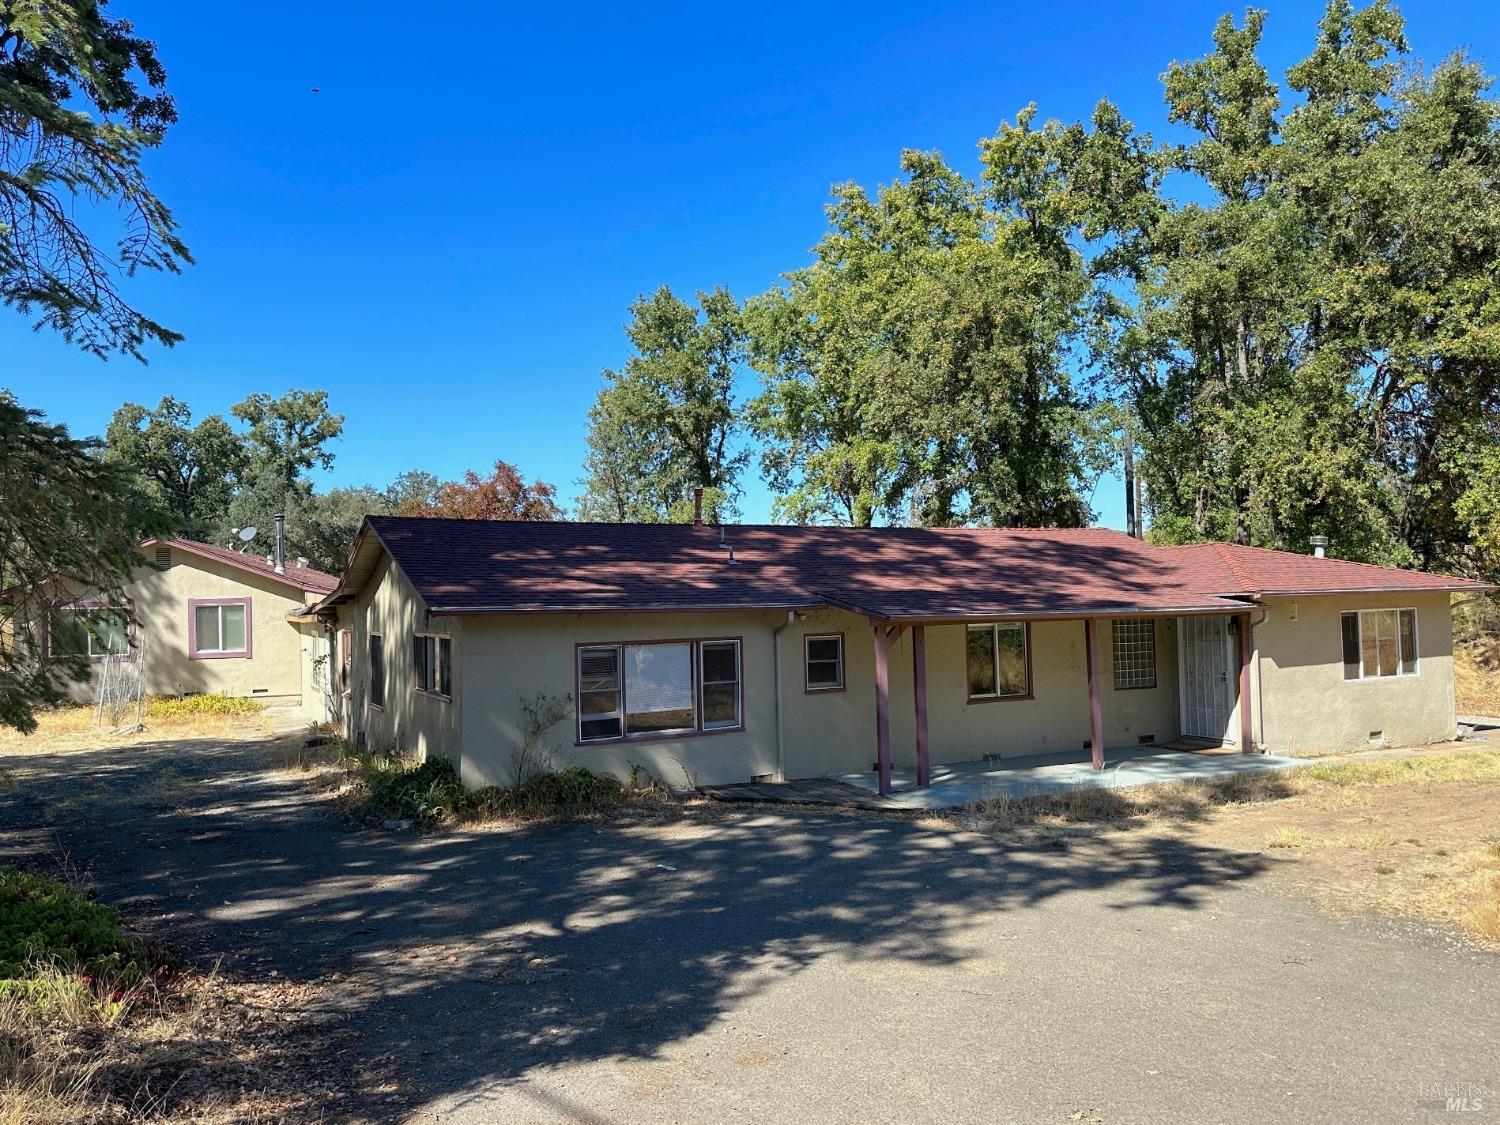 Photo of 4450 Scotts Valley Rd in Lakeport, CA